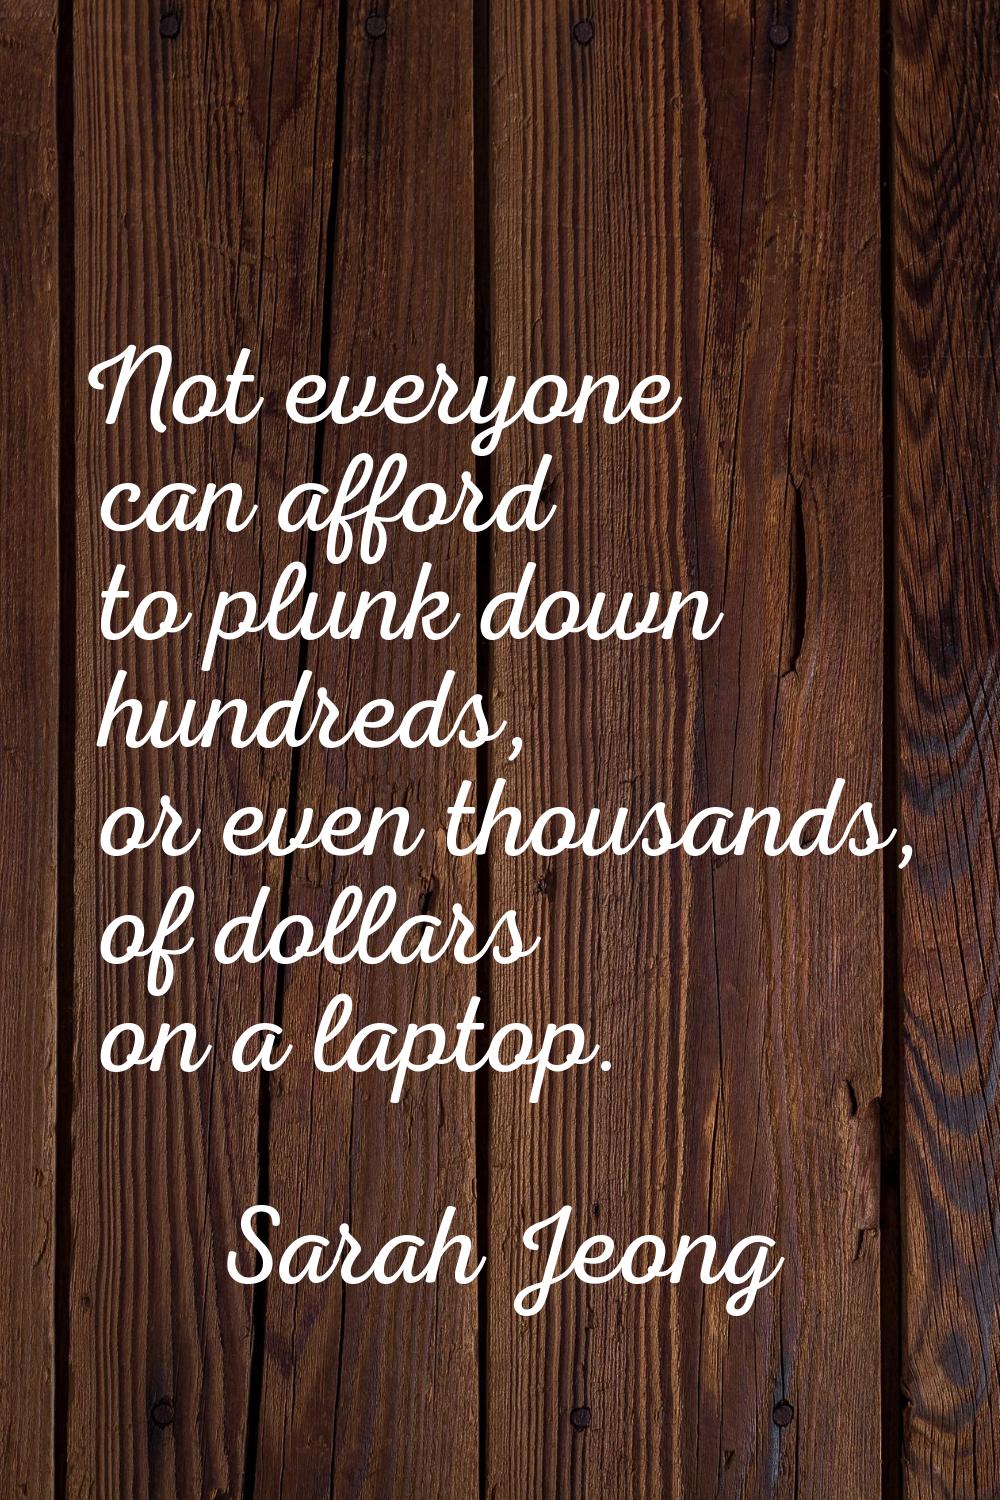 Not everyone can afford to plunk down hundreds, or even thousands, of dollars on a laptop.